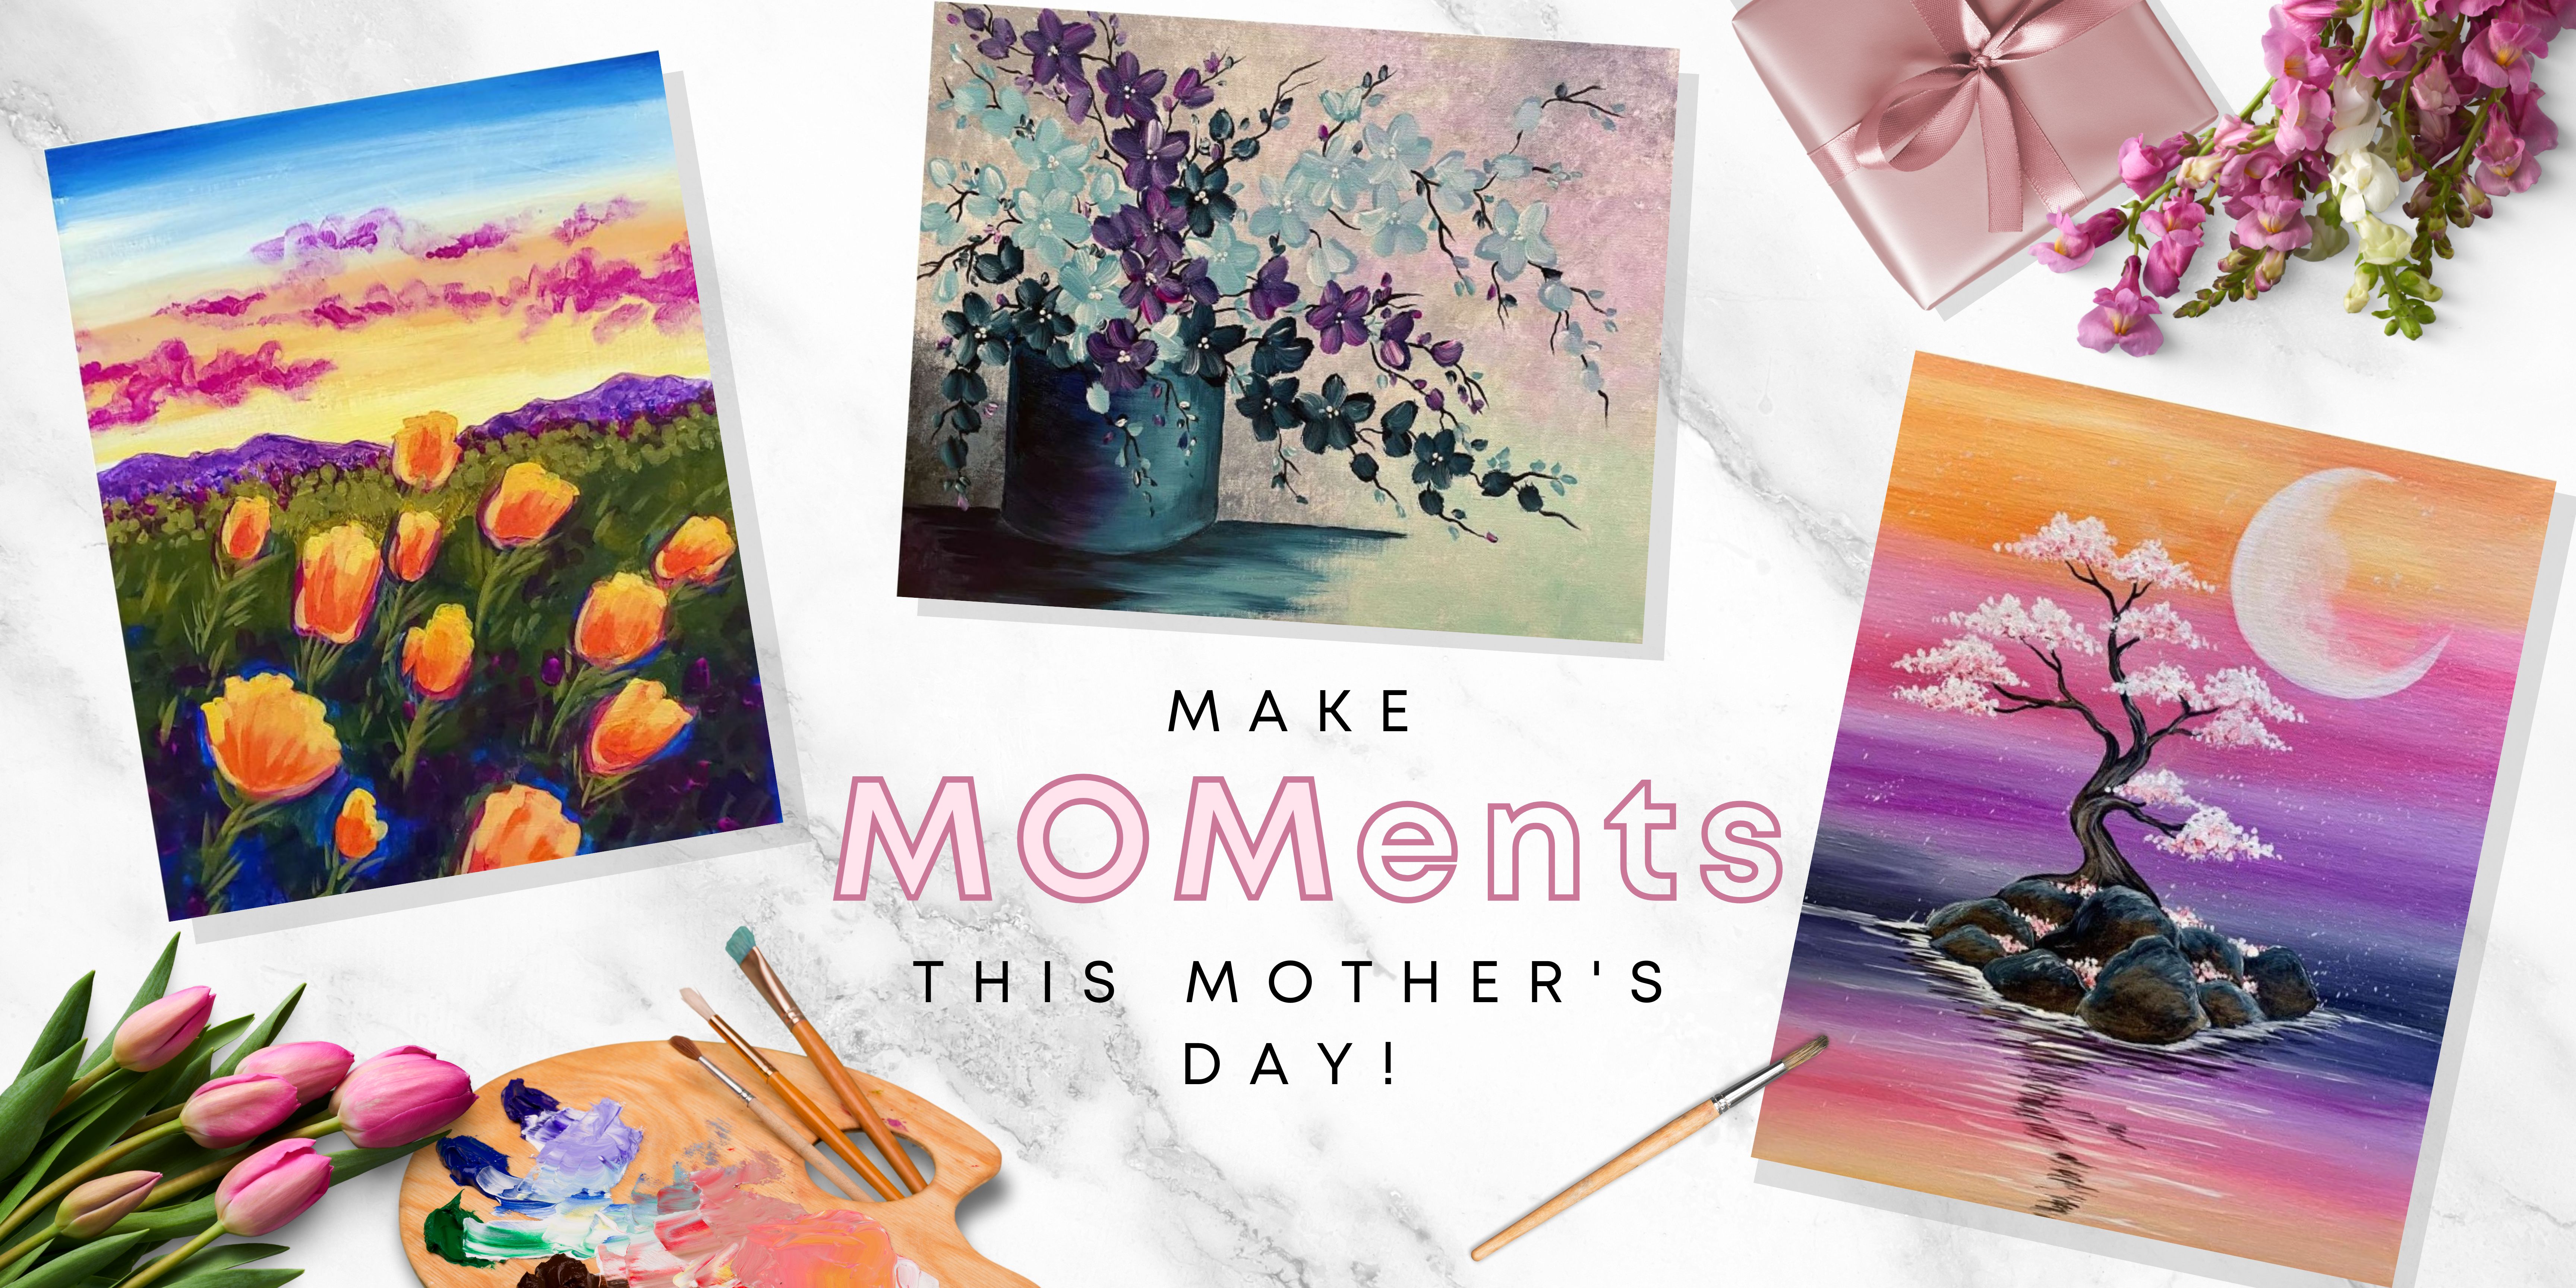 A Colorful Mother's Day Weekend!